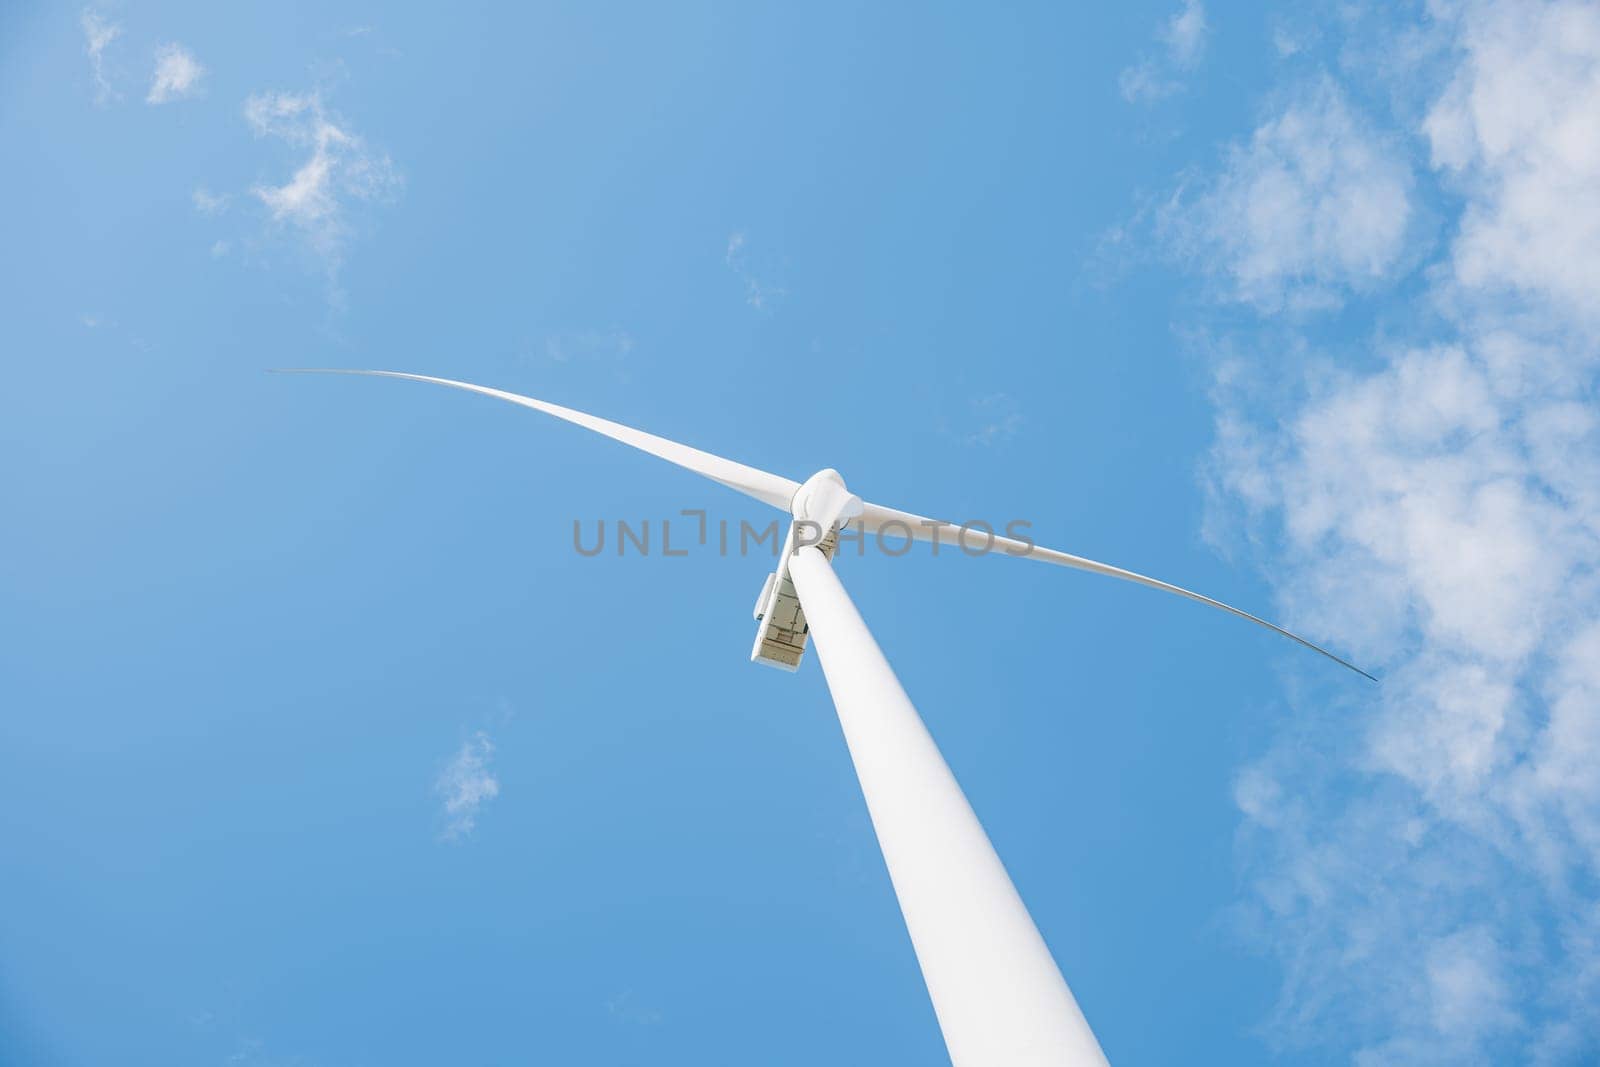 Atop a mountain windmill farm turbines illustrate efficient clean energy generation. Modern technology fosters sustainable development under the clear vast blue sky.